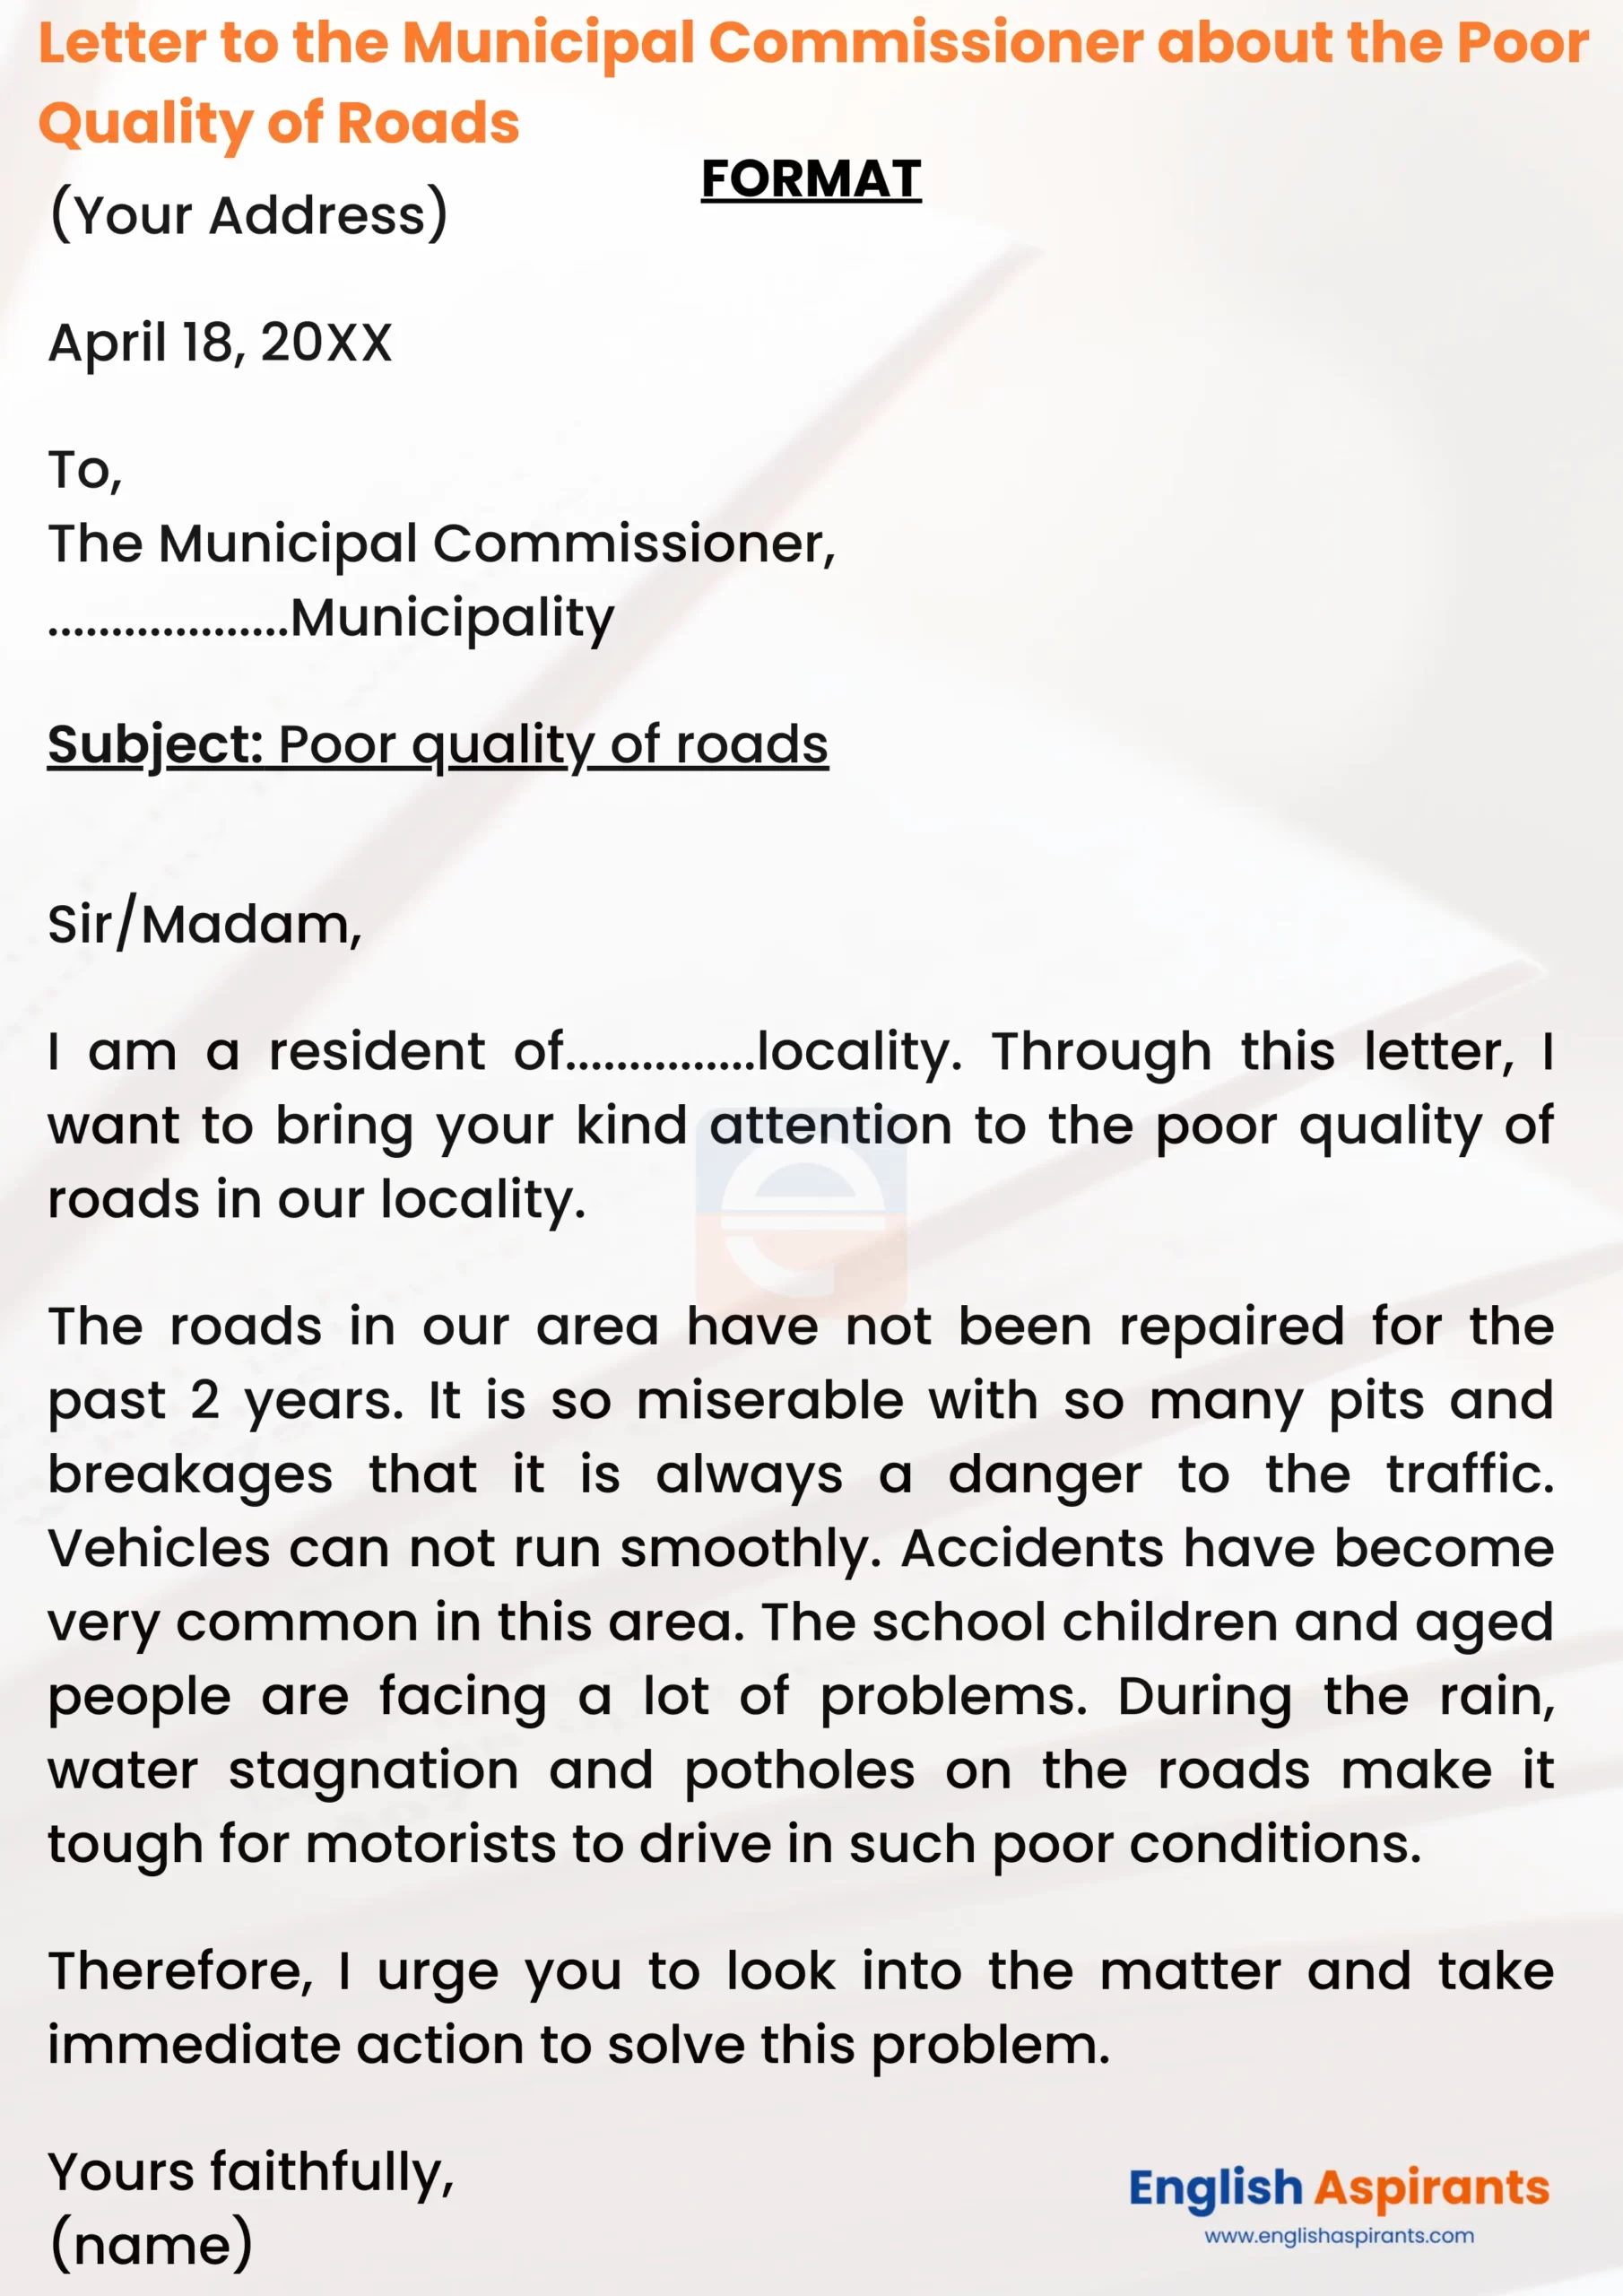 Letter to the Municipal Commissioner about the Poor Quality of Roads